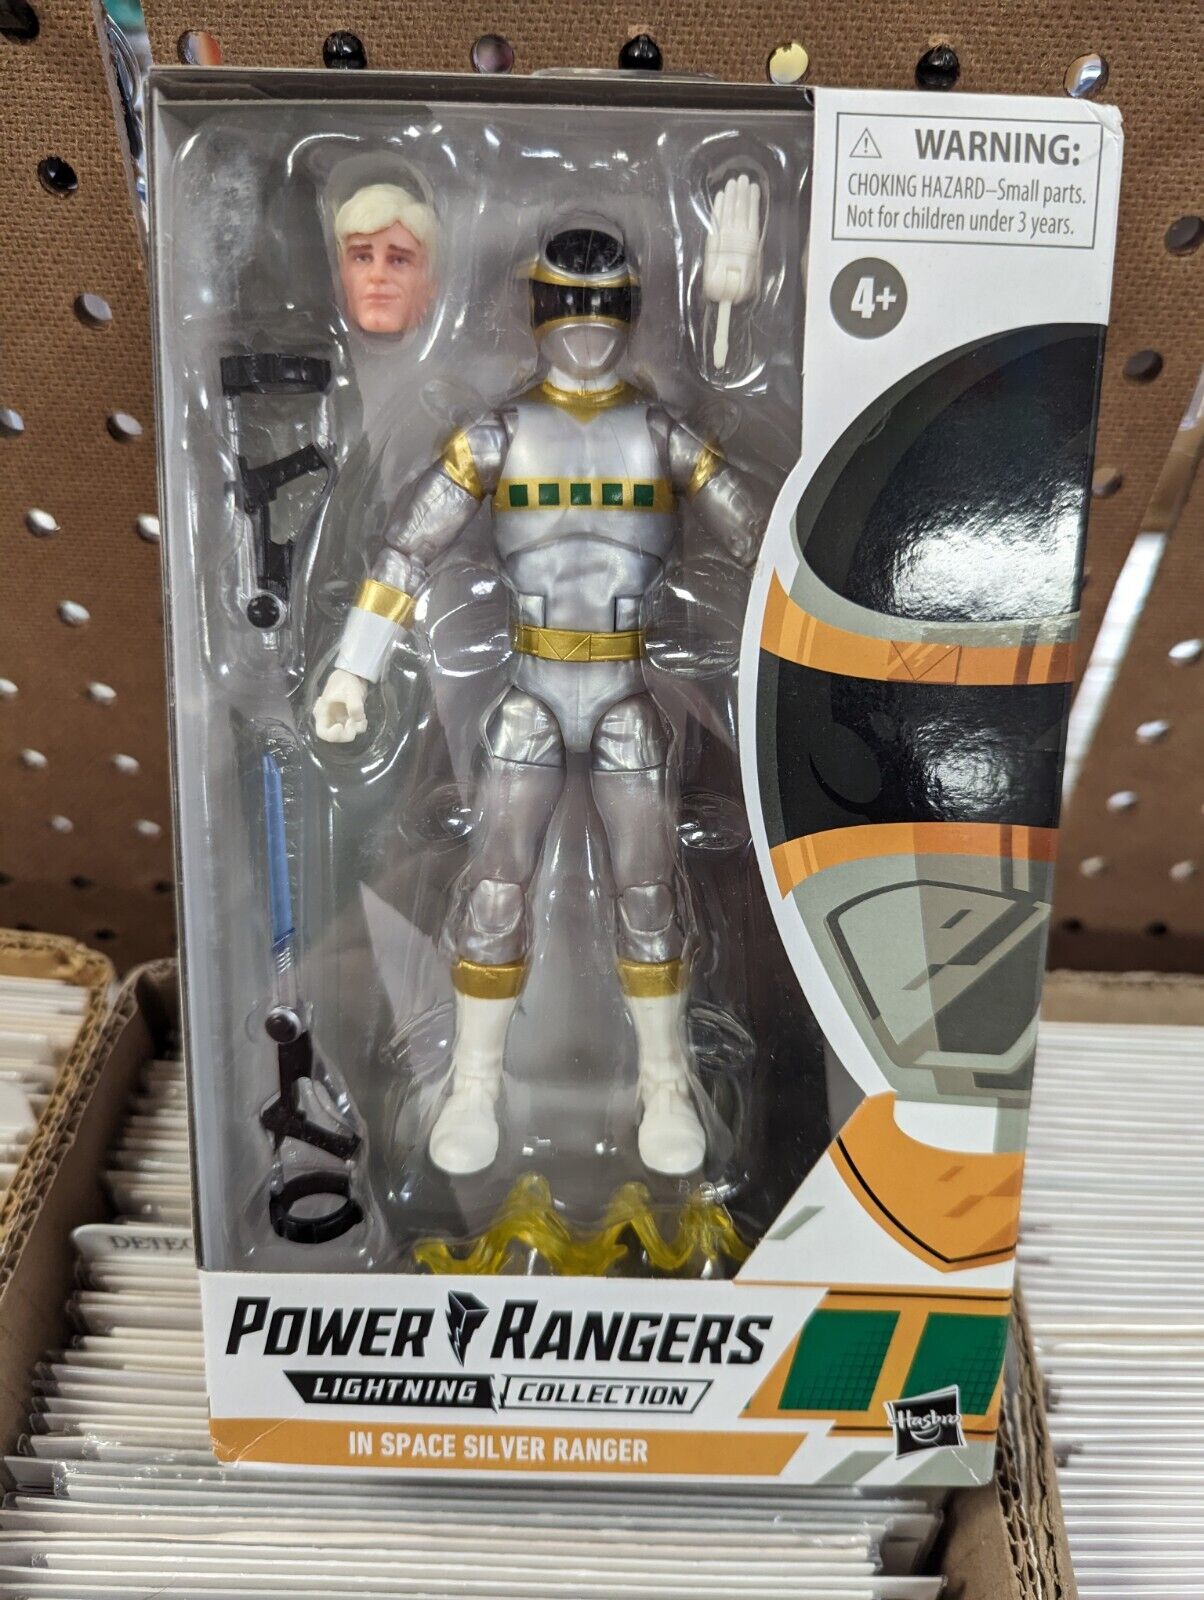 Power Rangers Lightning Collection In Space Silver Ranger Hasbro